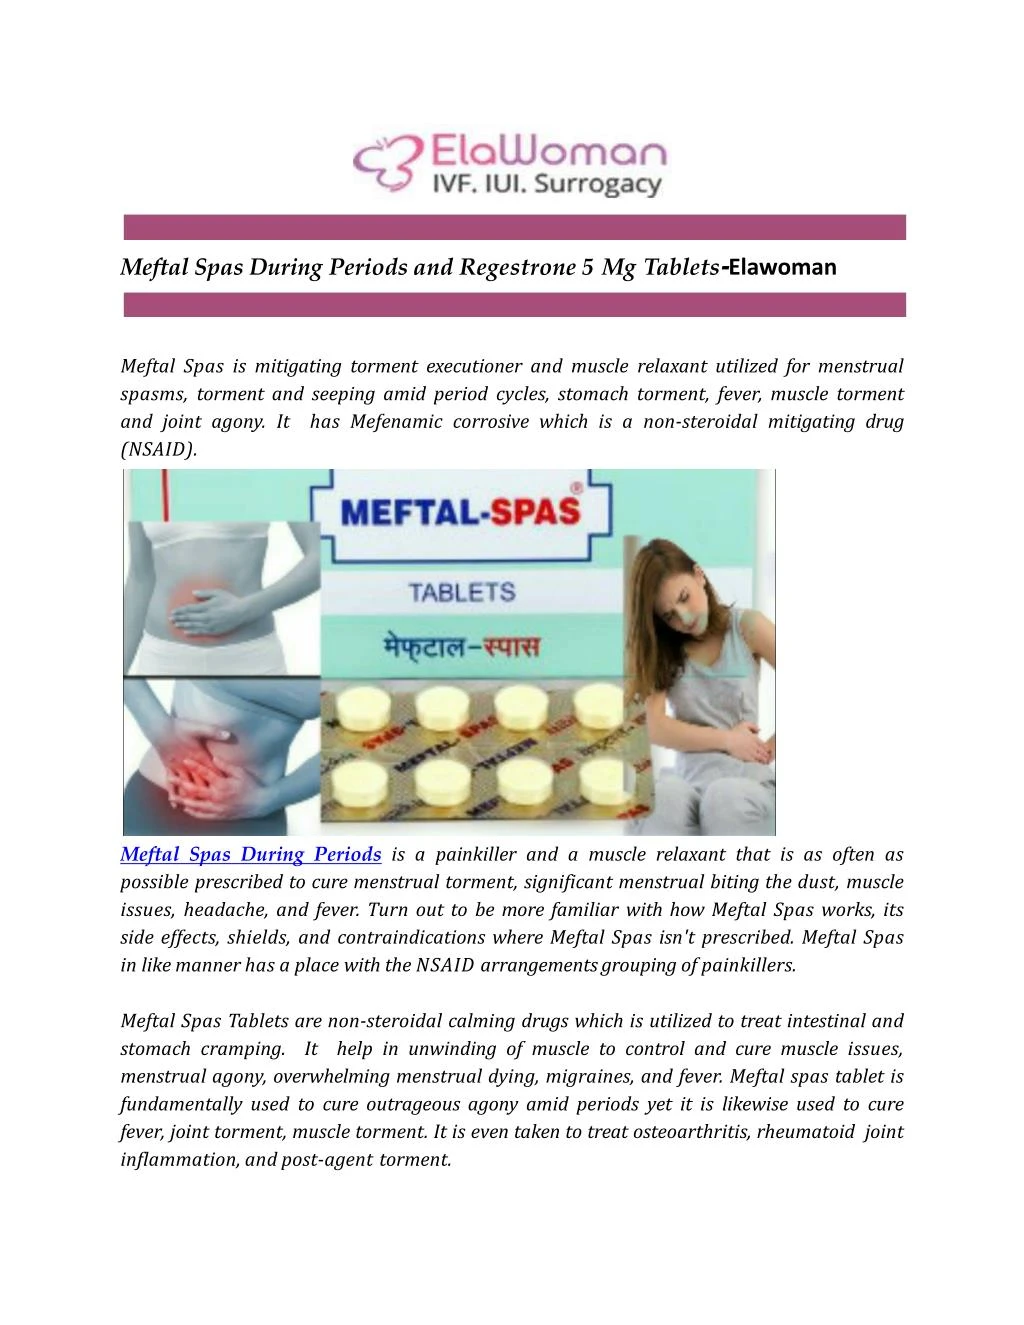 meftal spas during periods and regestrone